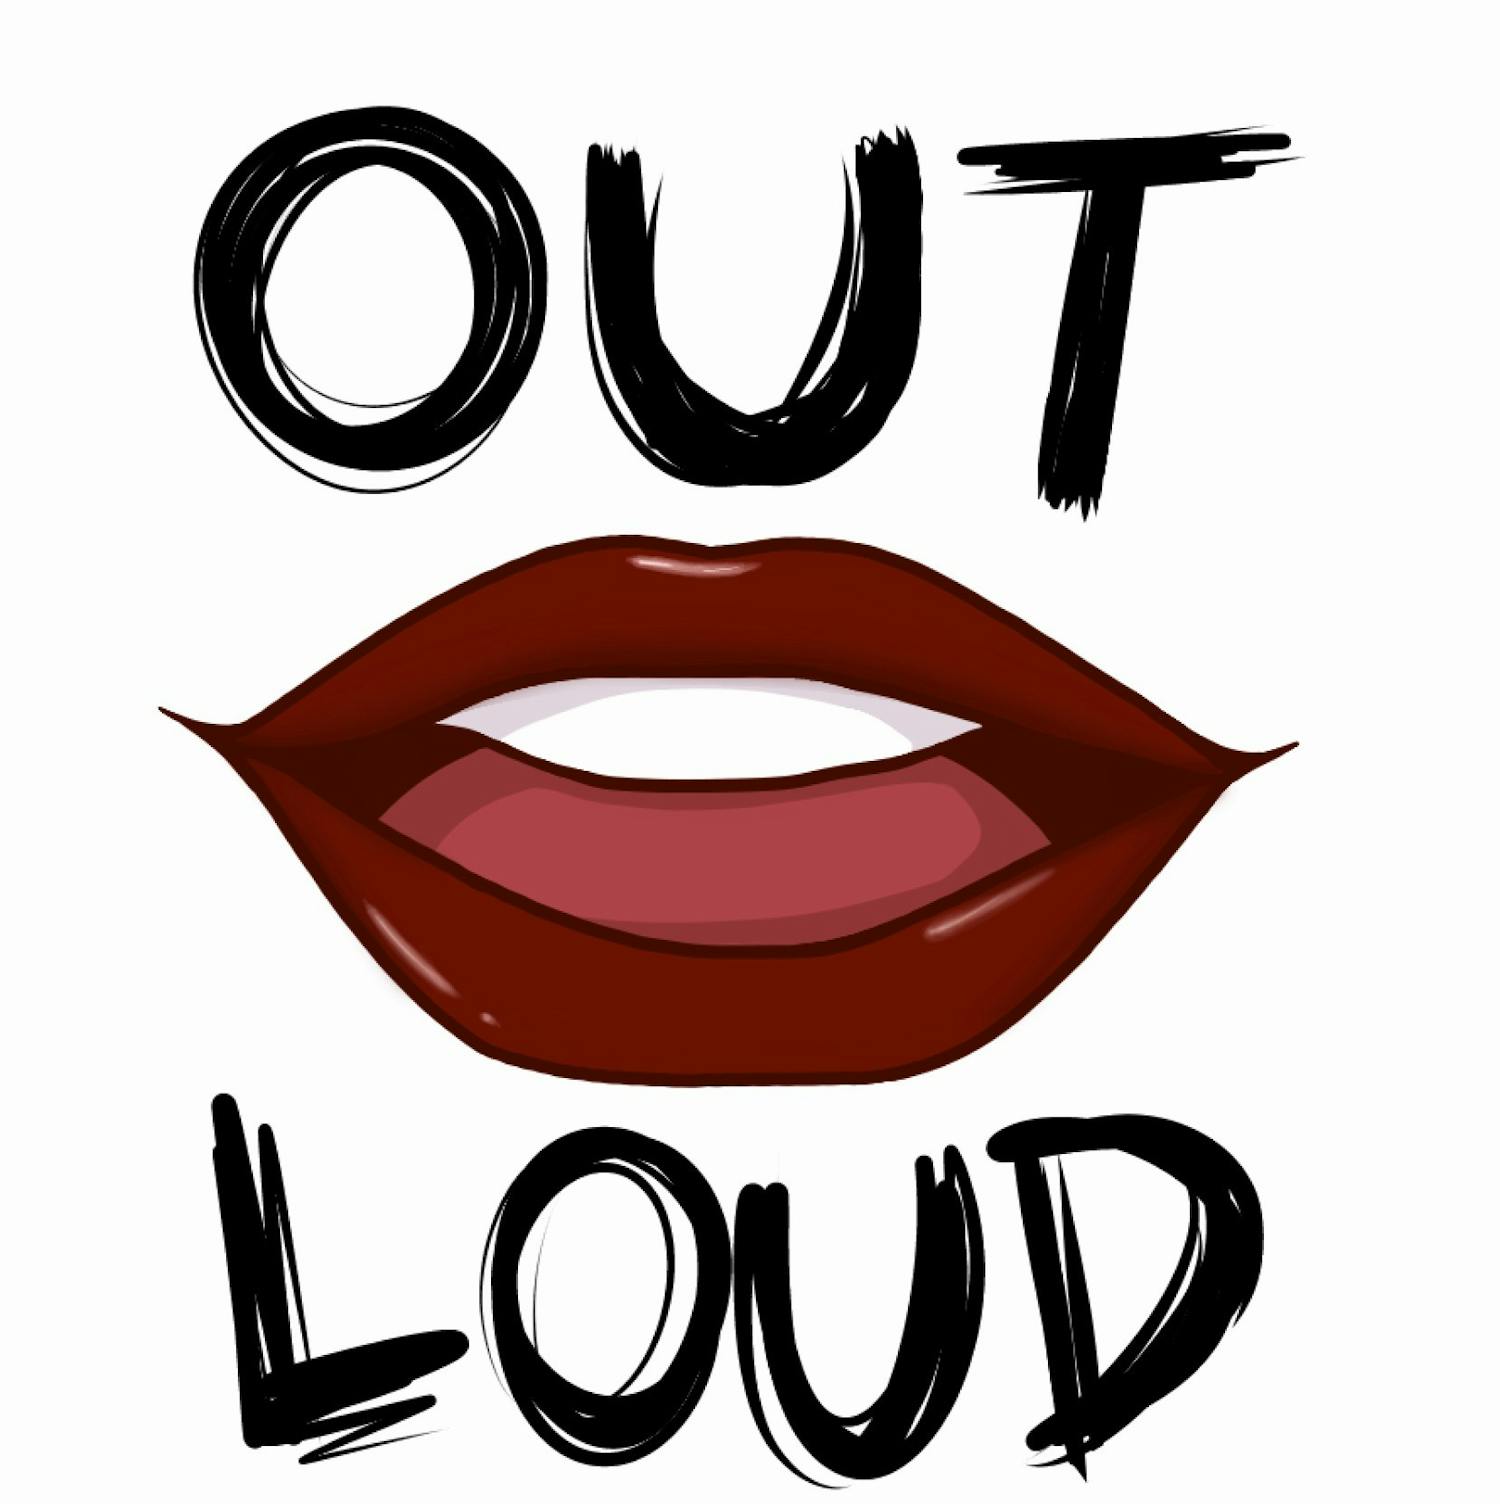 Out Loud - The Daily Cardinal